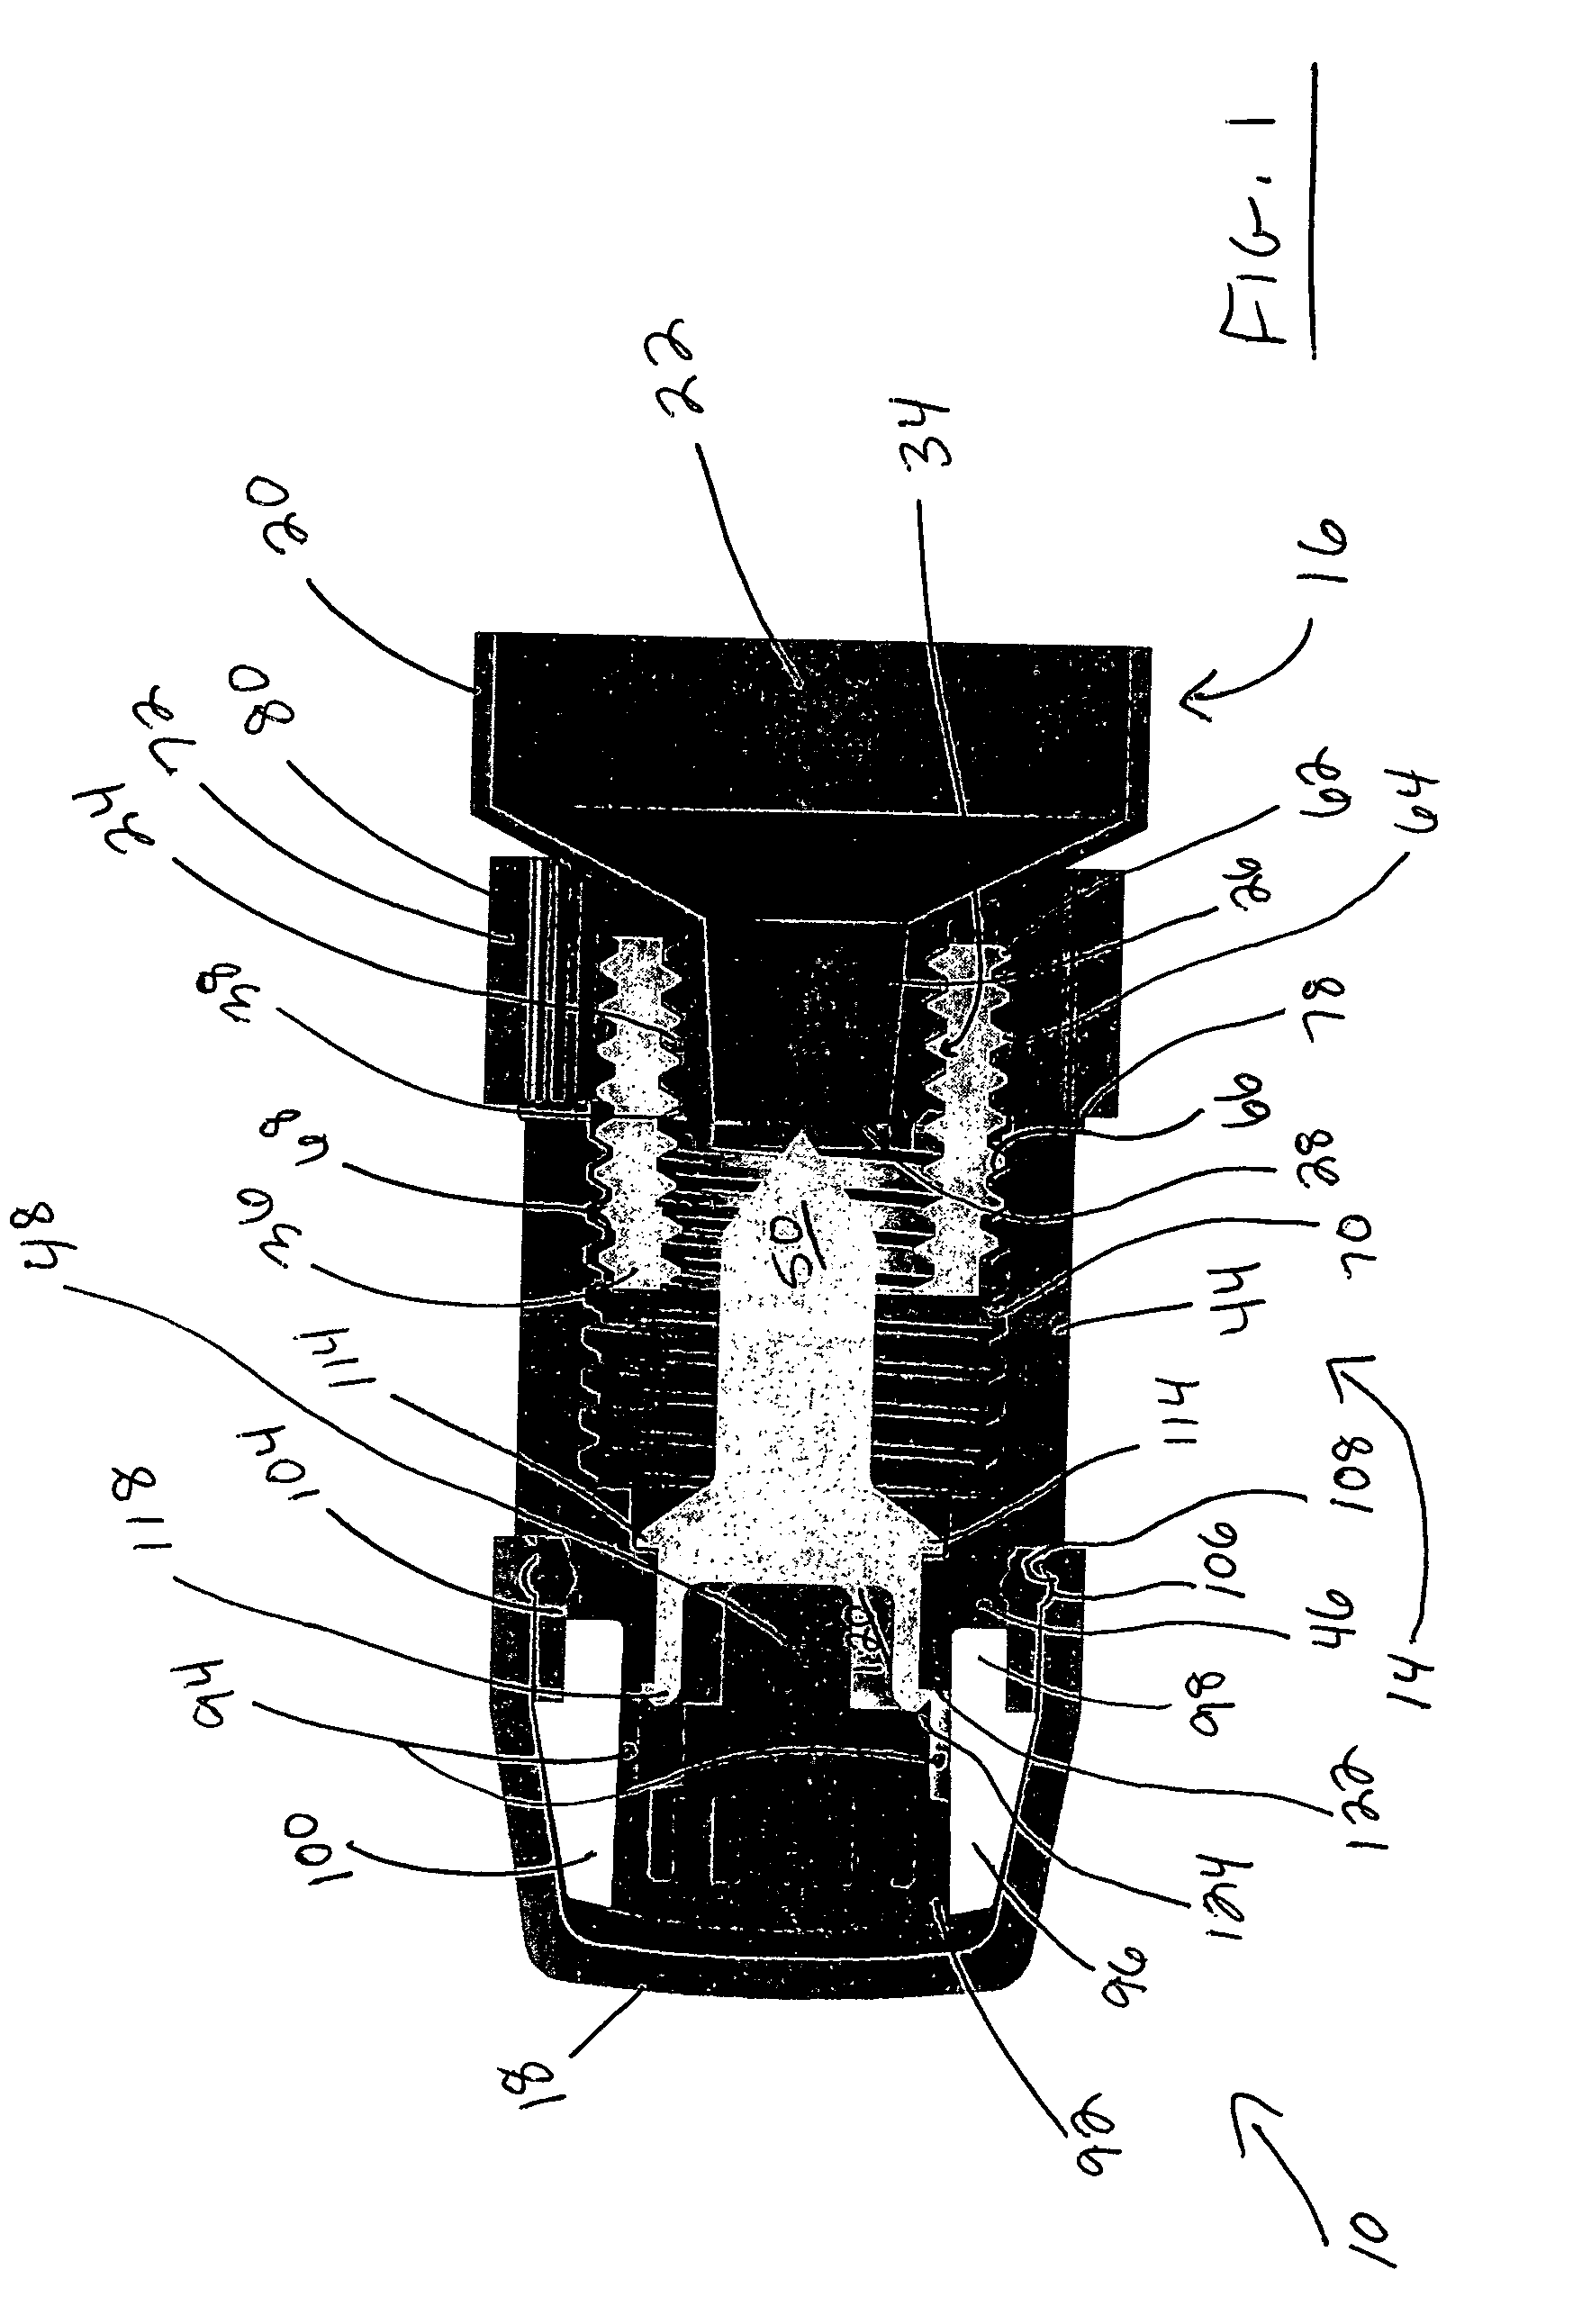 Container and one-way valve assembly for storing and dispensing substances, and related method